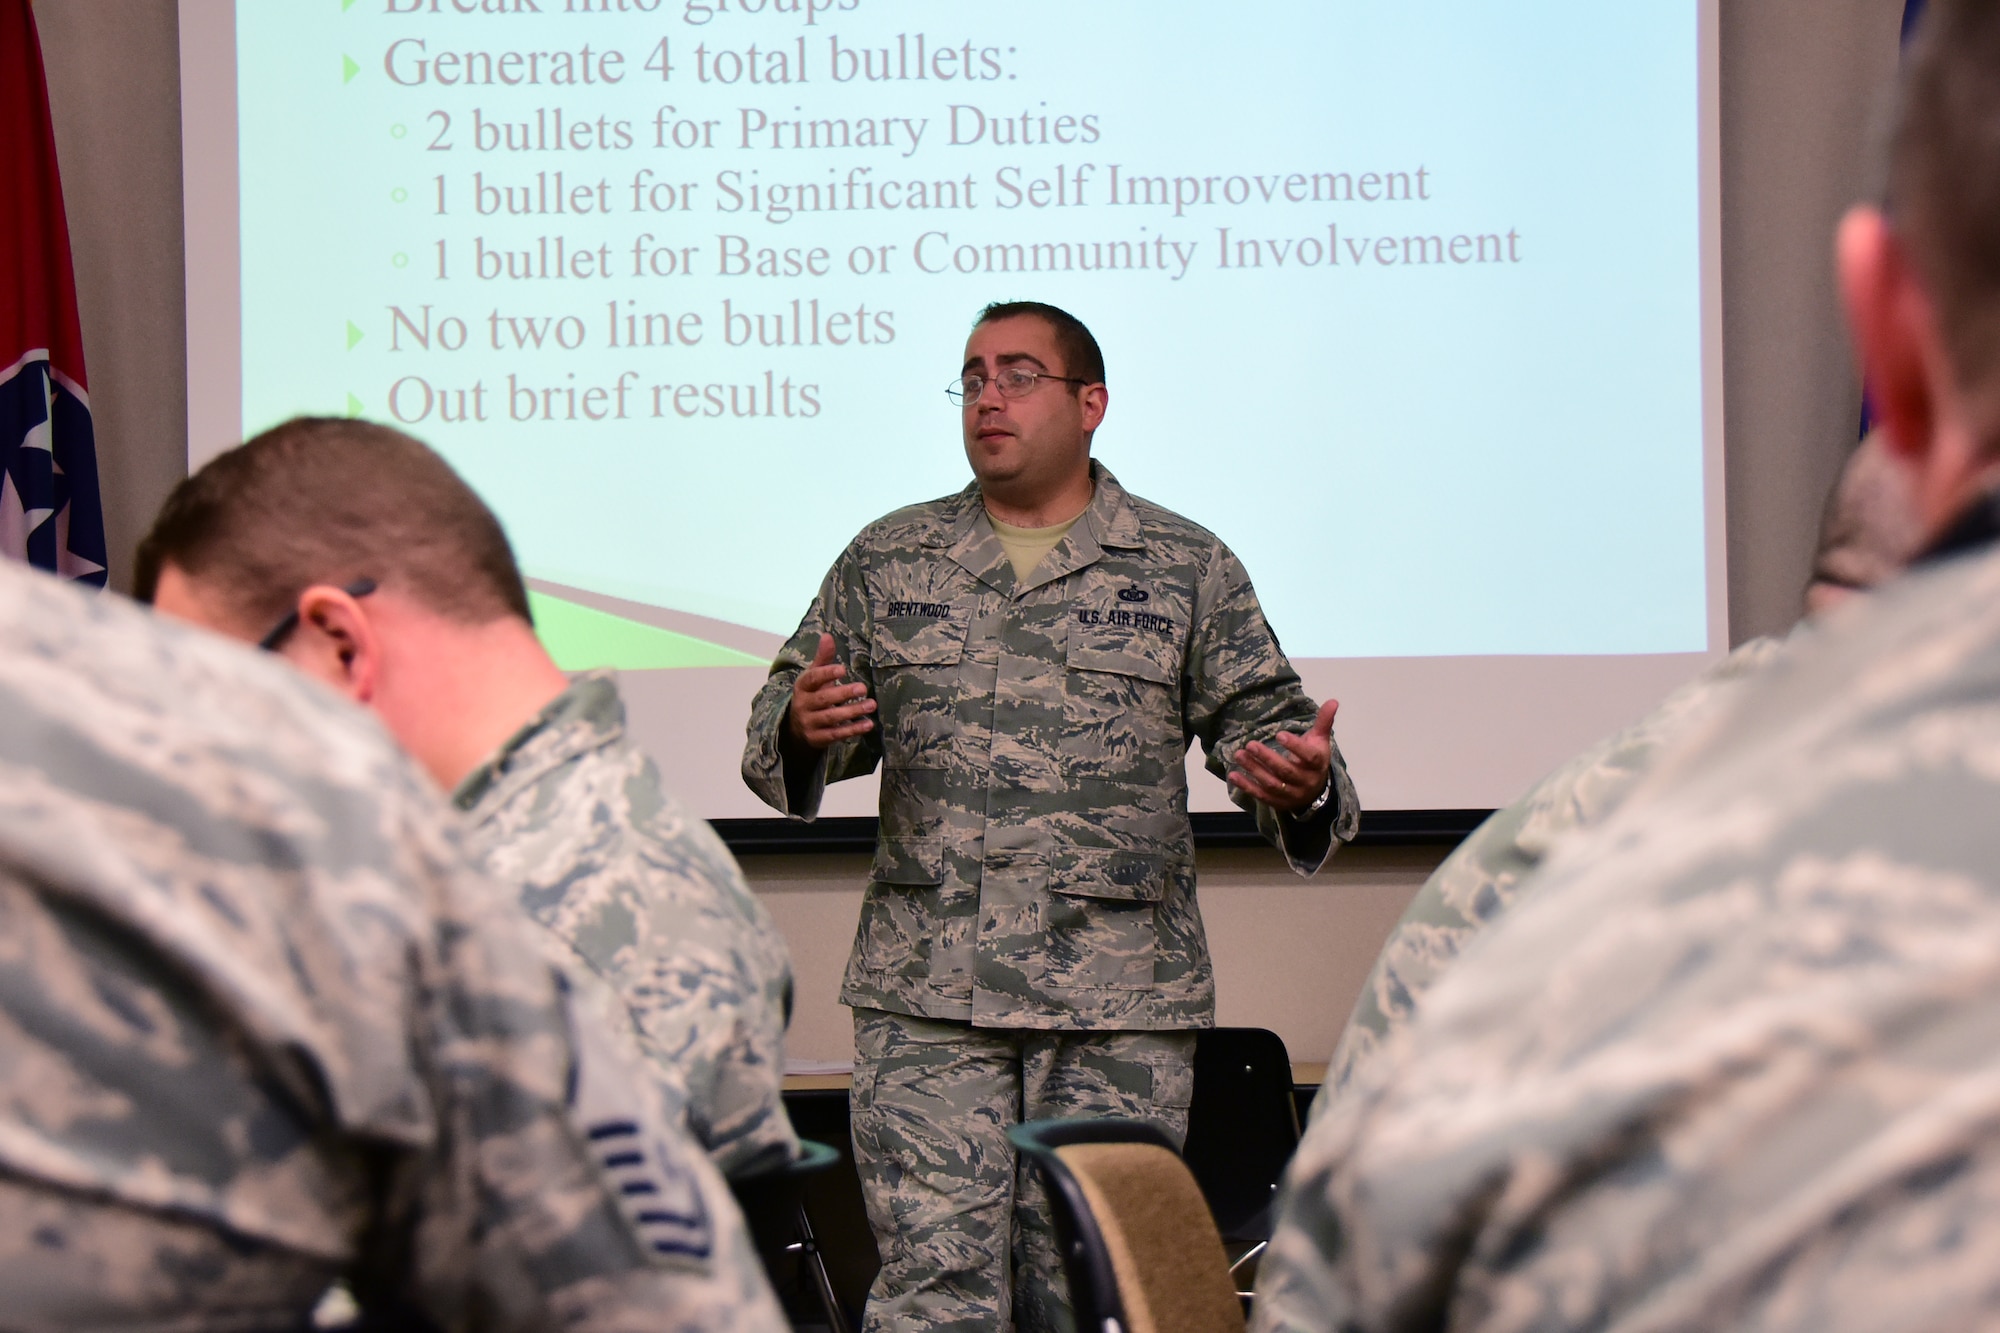 Tech. Sgt. Aaron D. Brentwood, an enlisted professional military education instructor, teaches a writing class to Airmen from the 118th Wing on Oct. 1, 2016 in Nashville, Tenn. Brentwood was one of two instructors to come over from McGhee Tyson Air National Guard Base to teach a class on professional writing. (Air National Guard photo by Airman 1st Class Anthony Agosti/Released)